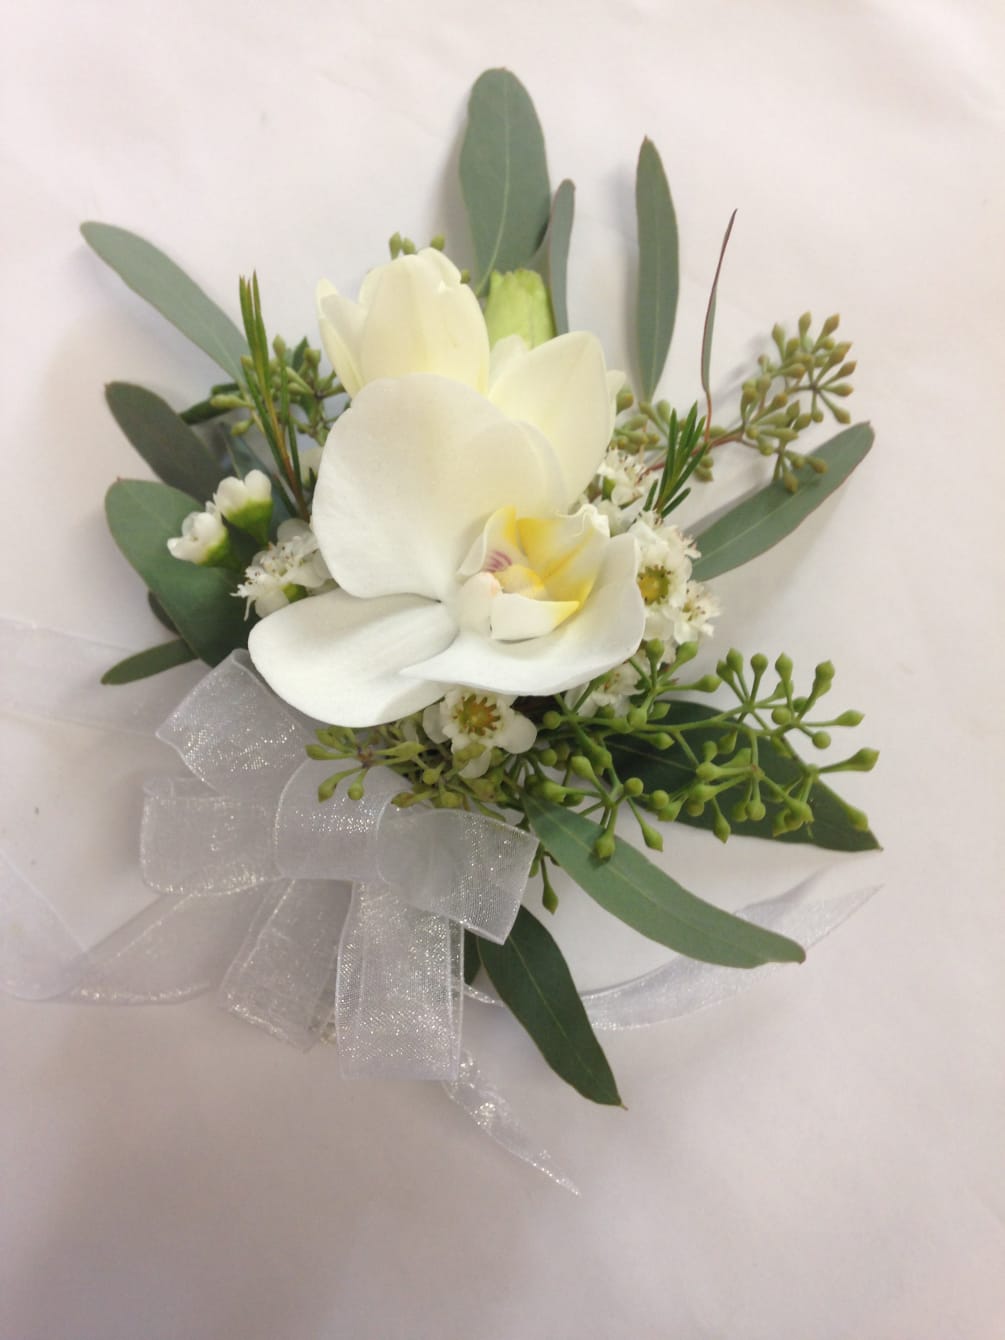 A regal corsage of white phaelenopsis orchid and seasonal greens.